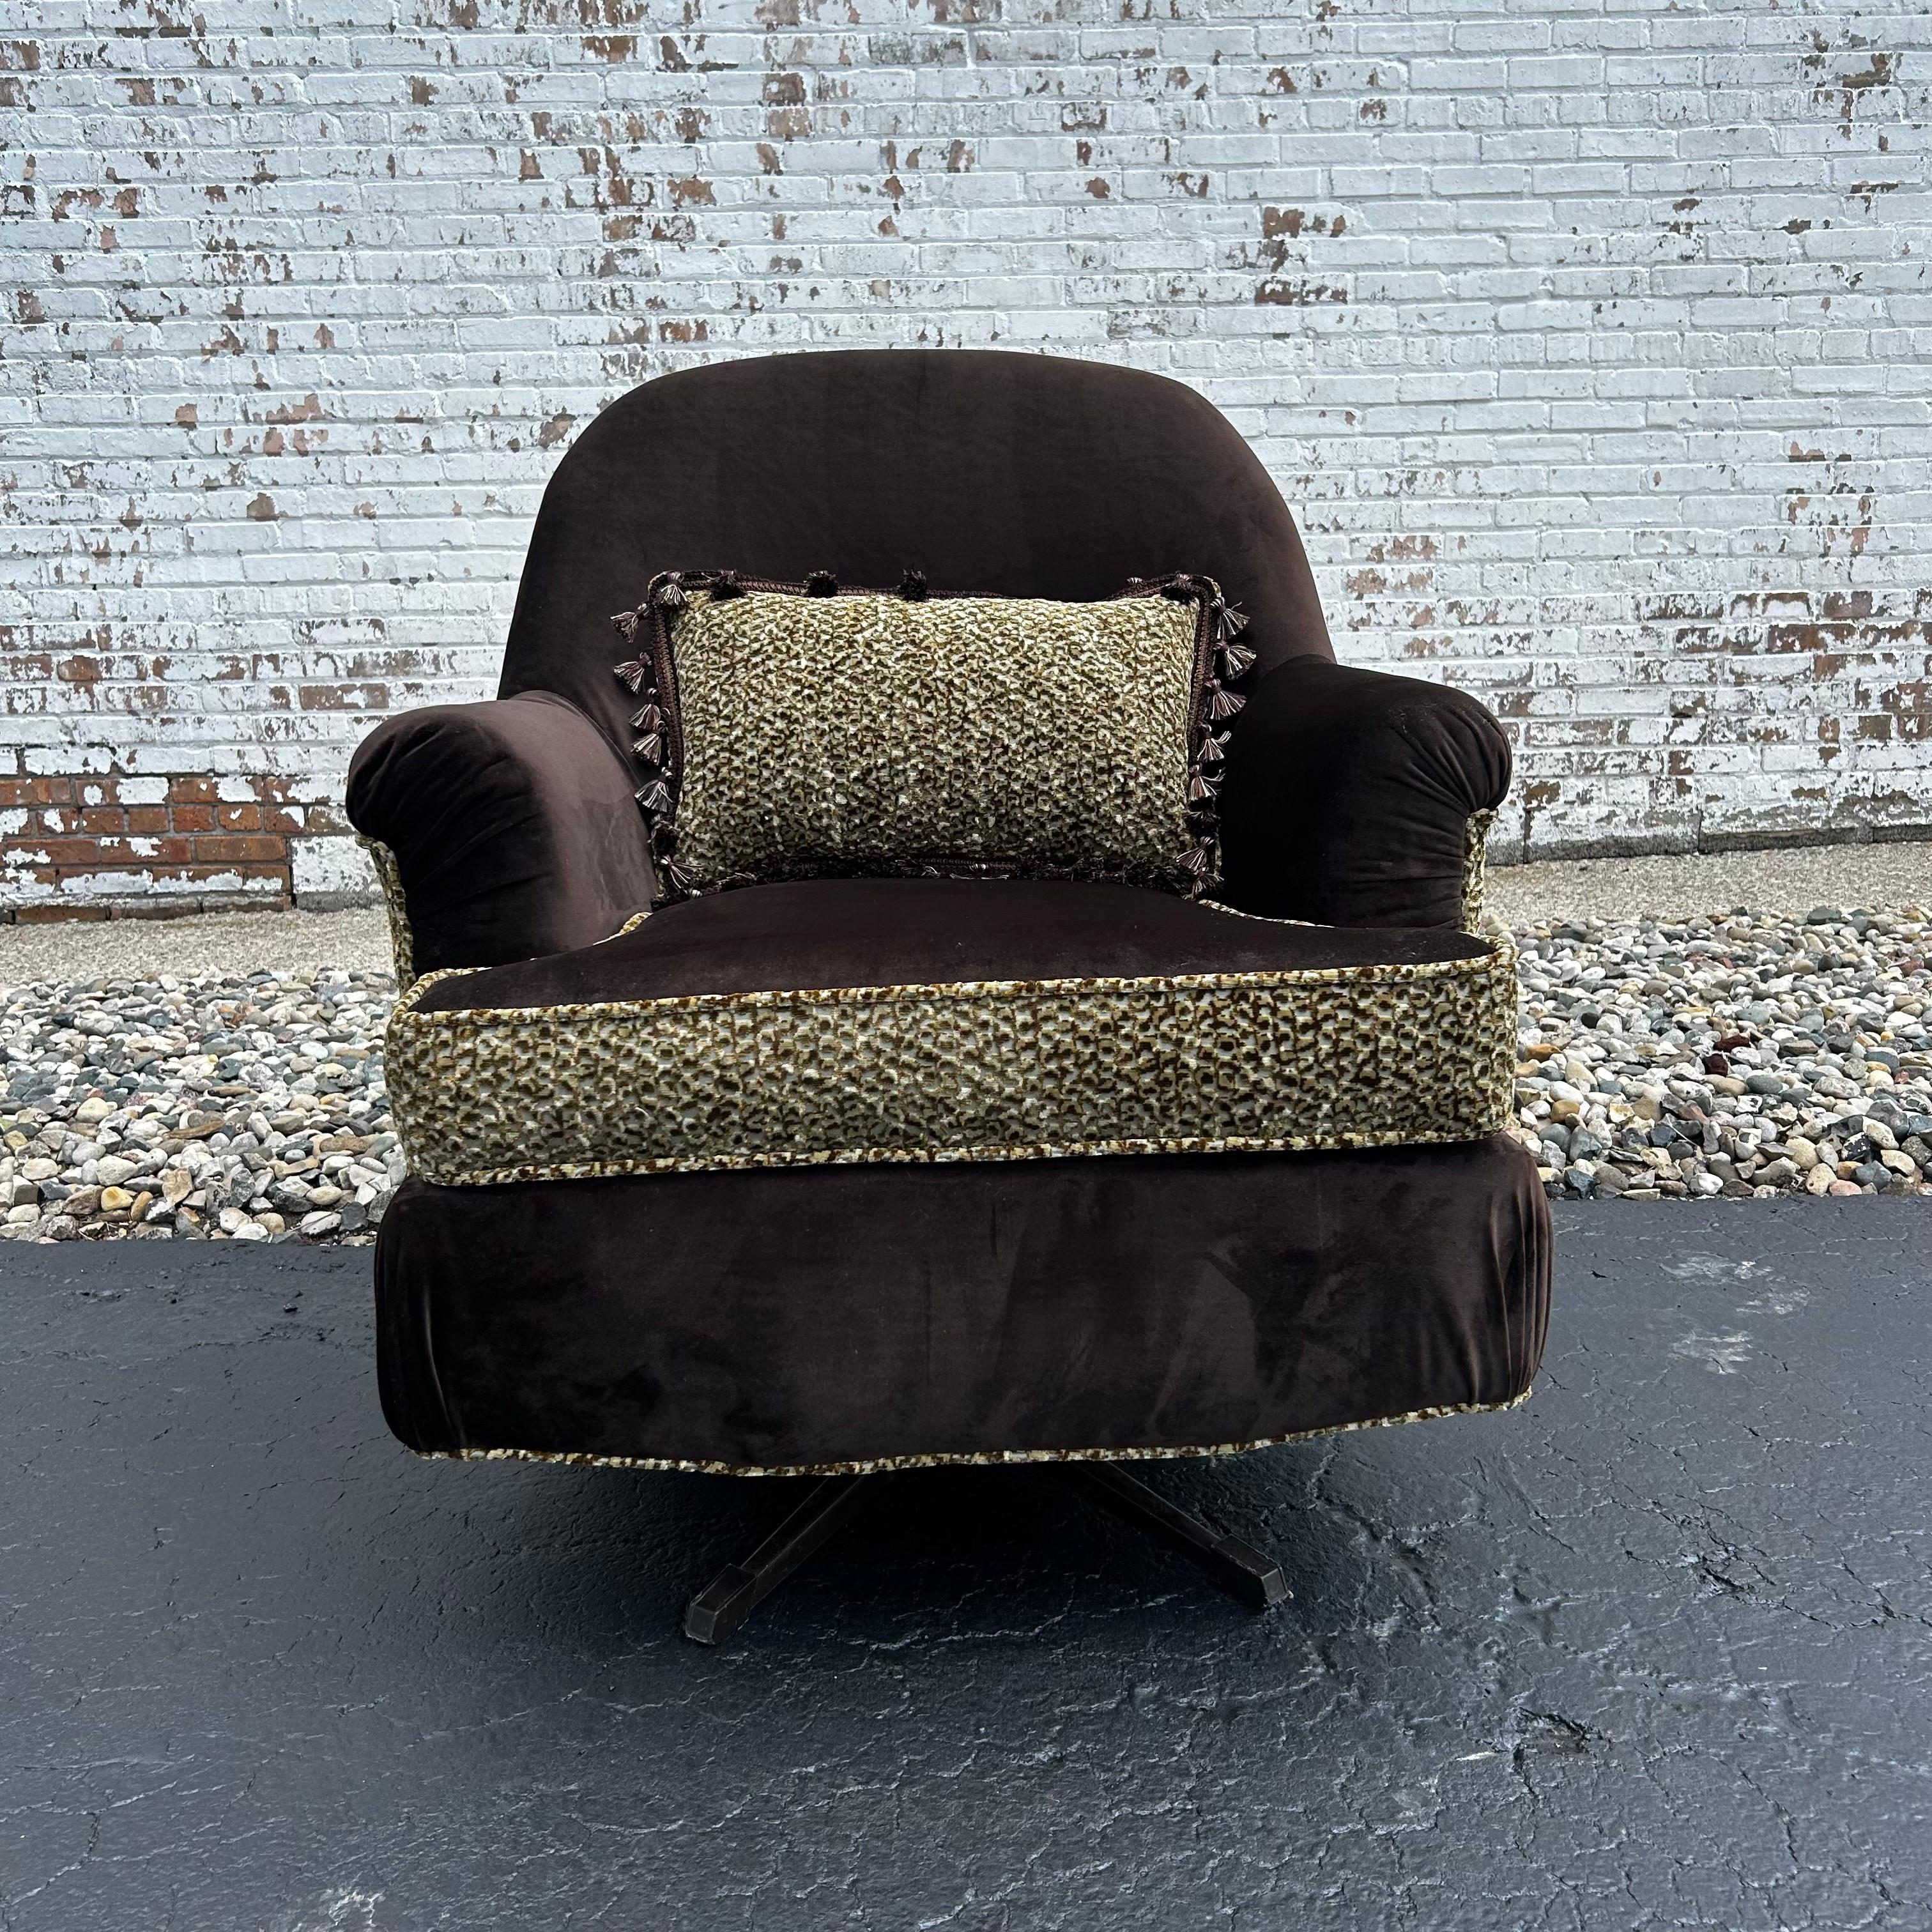 Stylish and lush, this vintage swivel rocker is looking for a new place to call home. We love her modern Safari Glam aesthetic! Ultra soft velvet in dark brown pairs with a cozy leopard print chenille in complementary colors. With fresh foam and